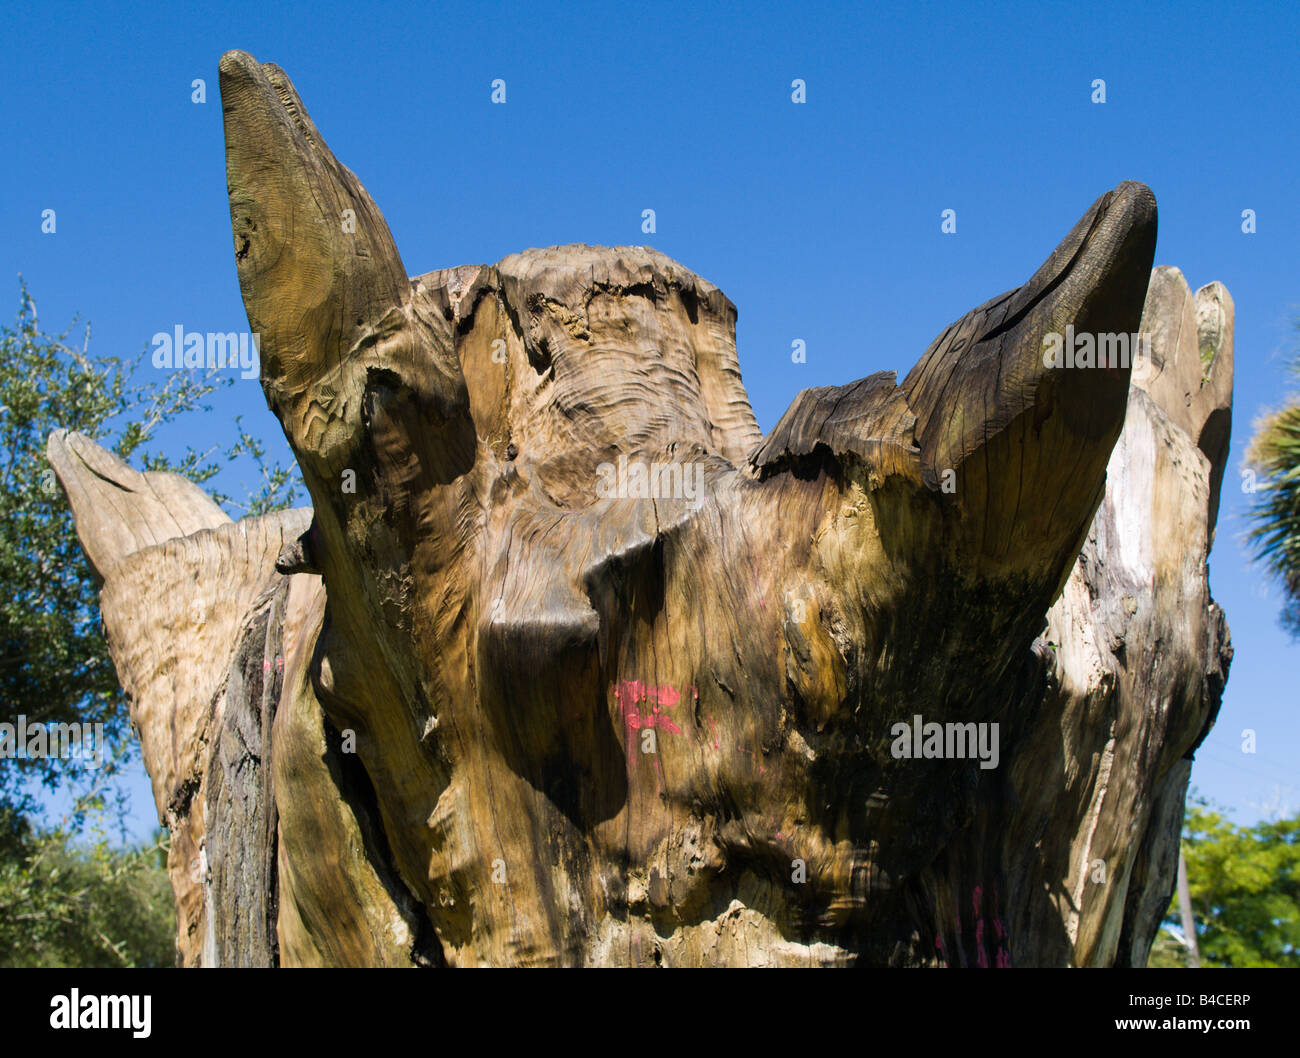 DOLPHINS CARVED INTO AN OAK IN MELBOURNE BEACH FLORIDA Stock Photo